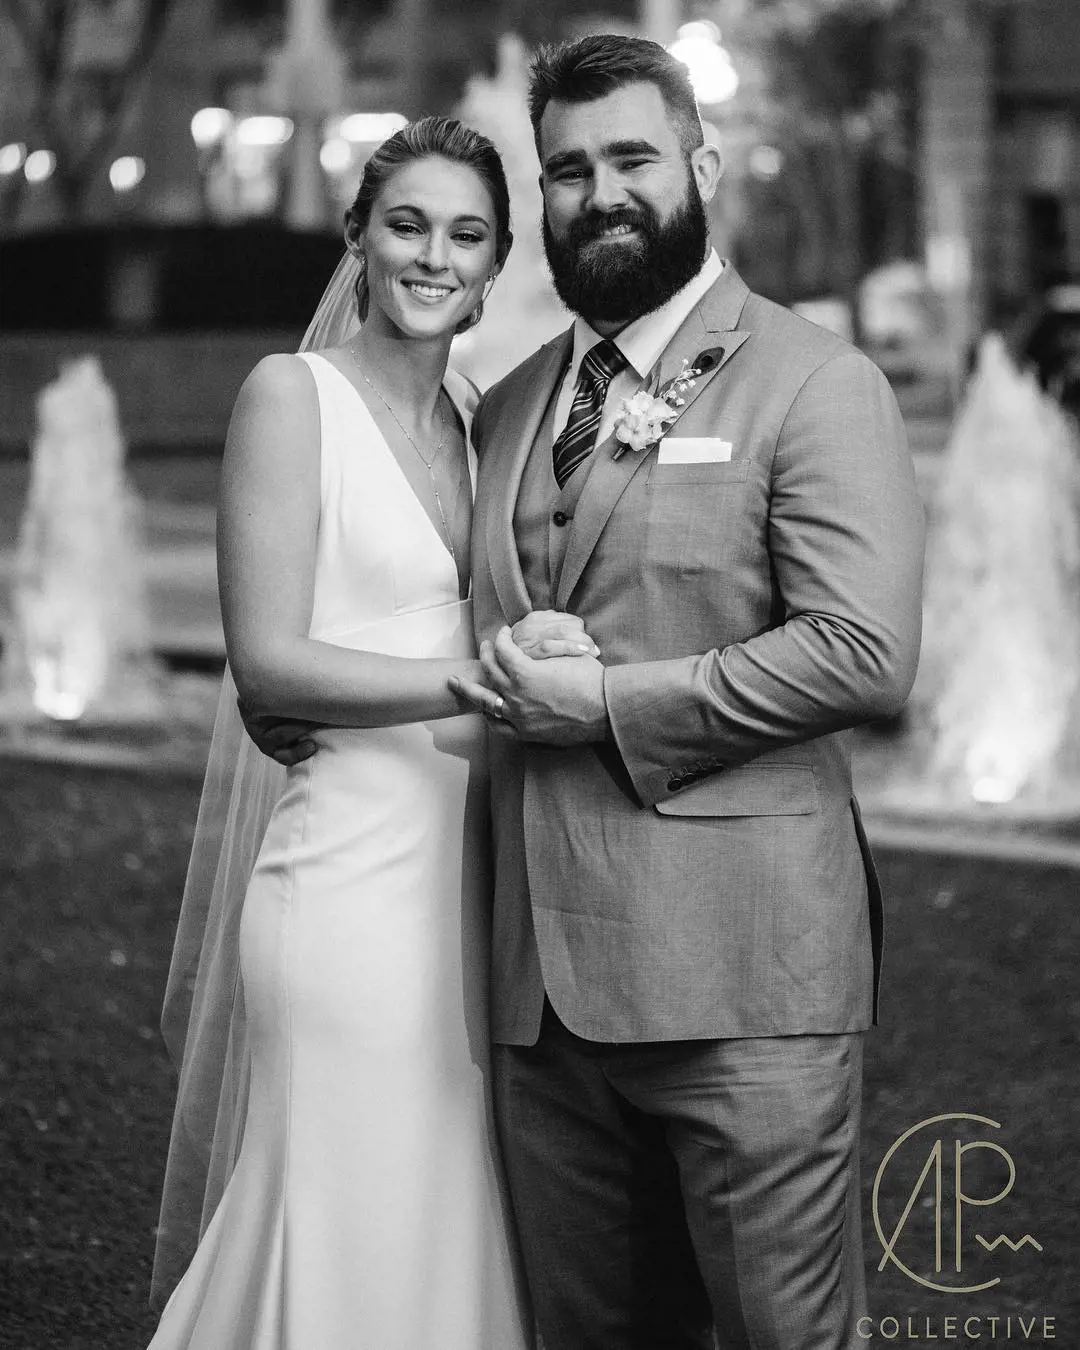 Jason and Kylie on their wedding day [Credit: AGP Collective]